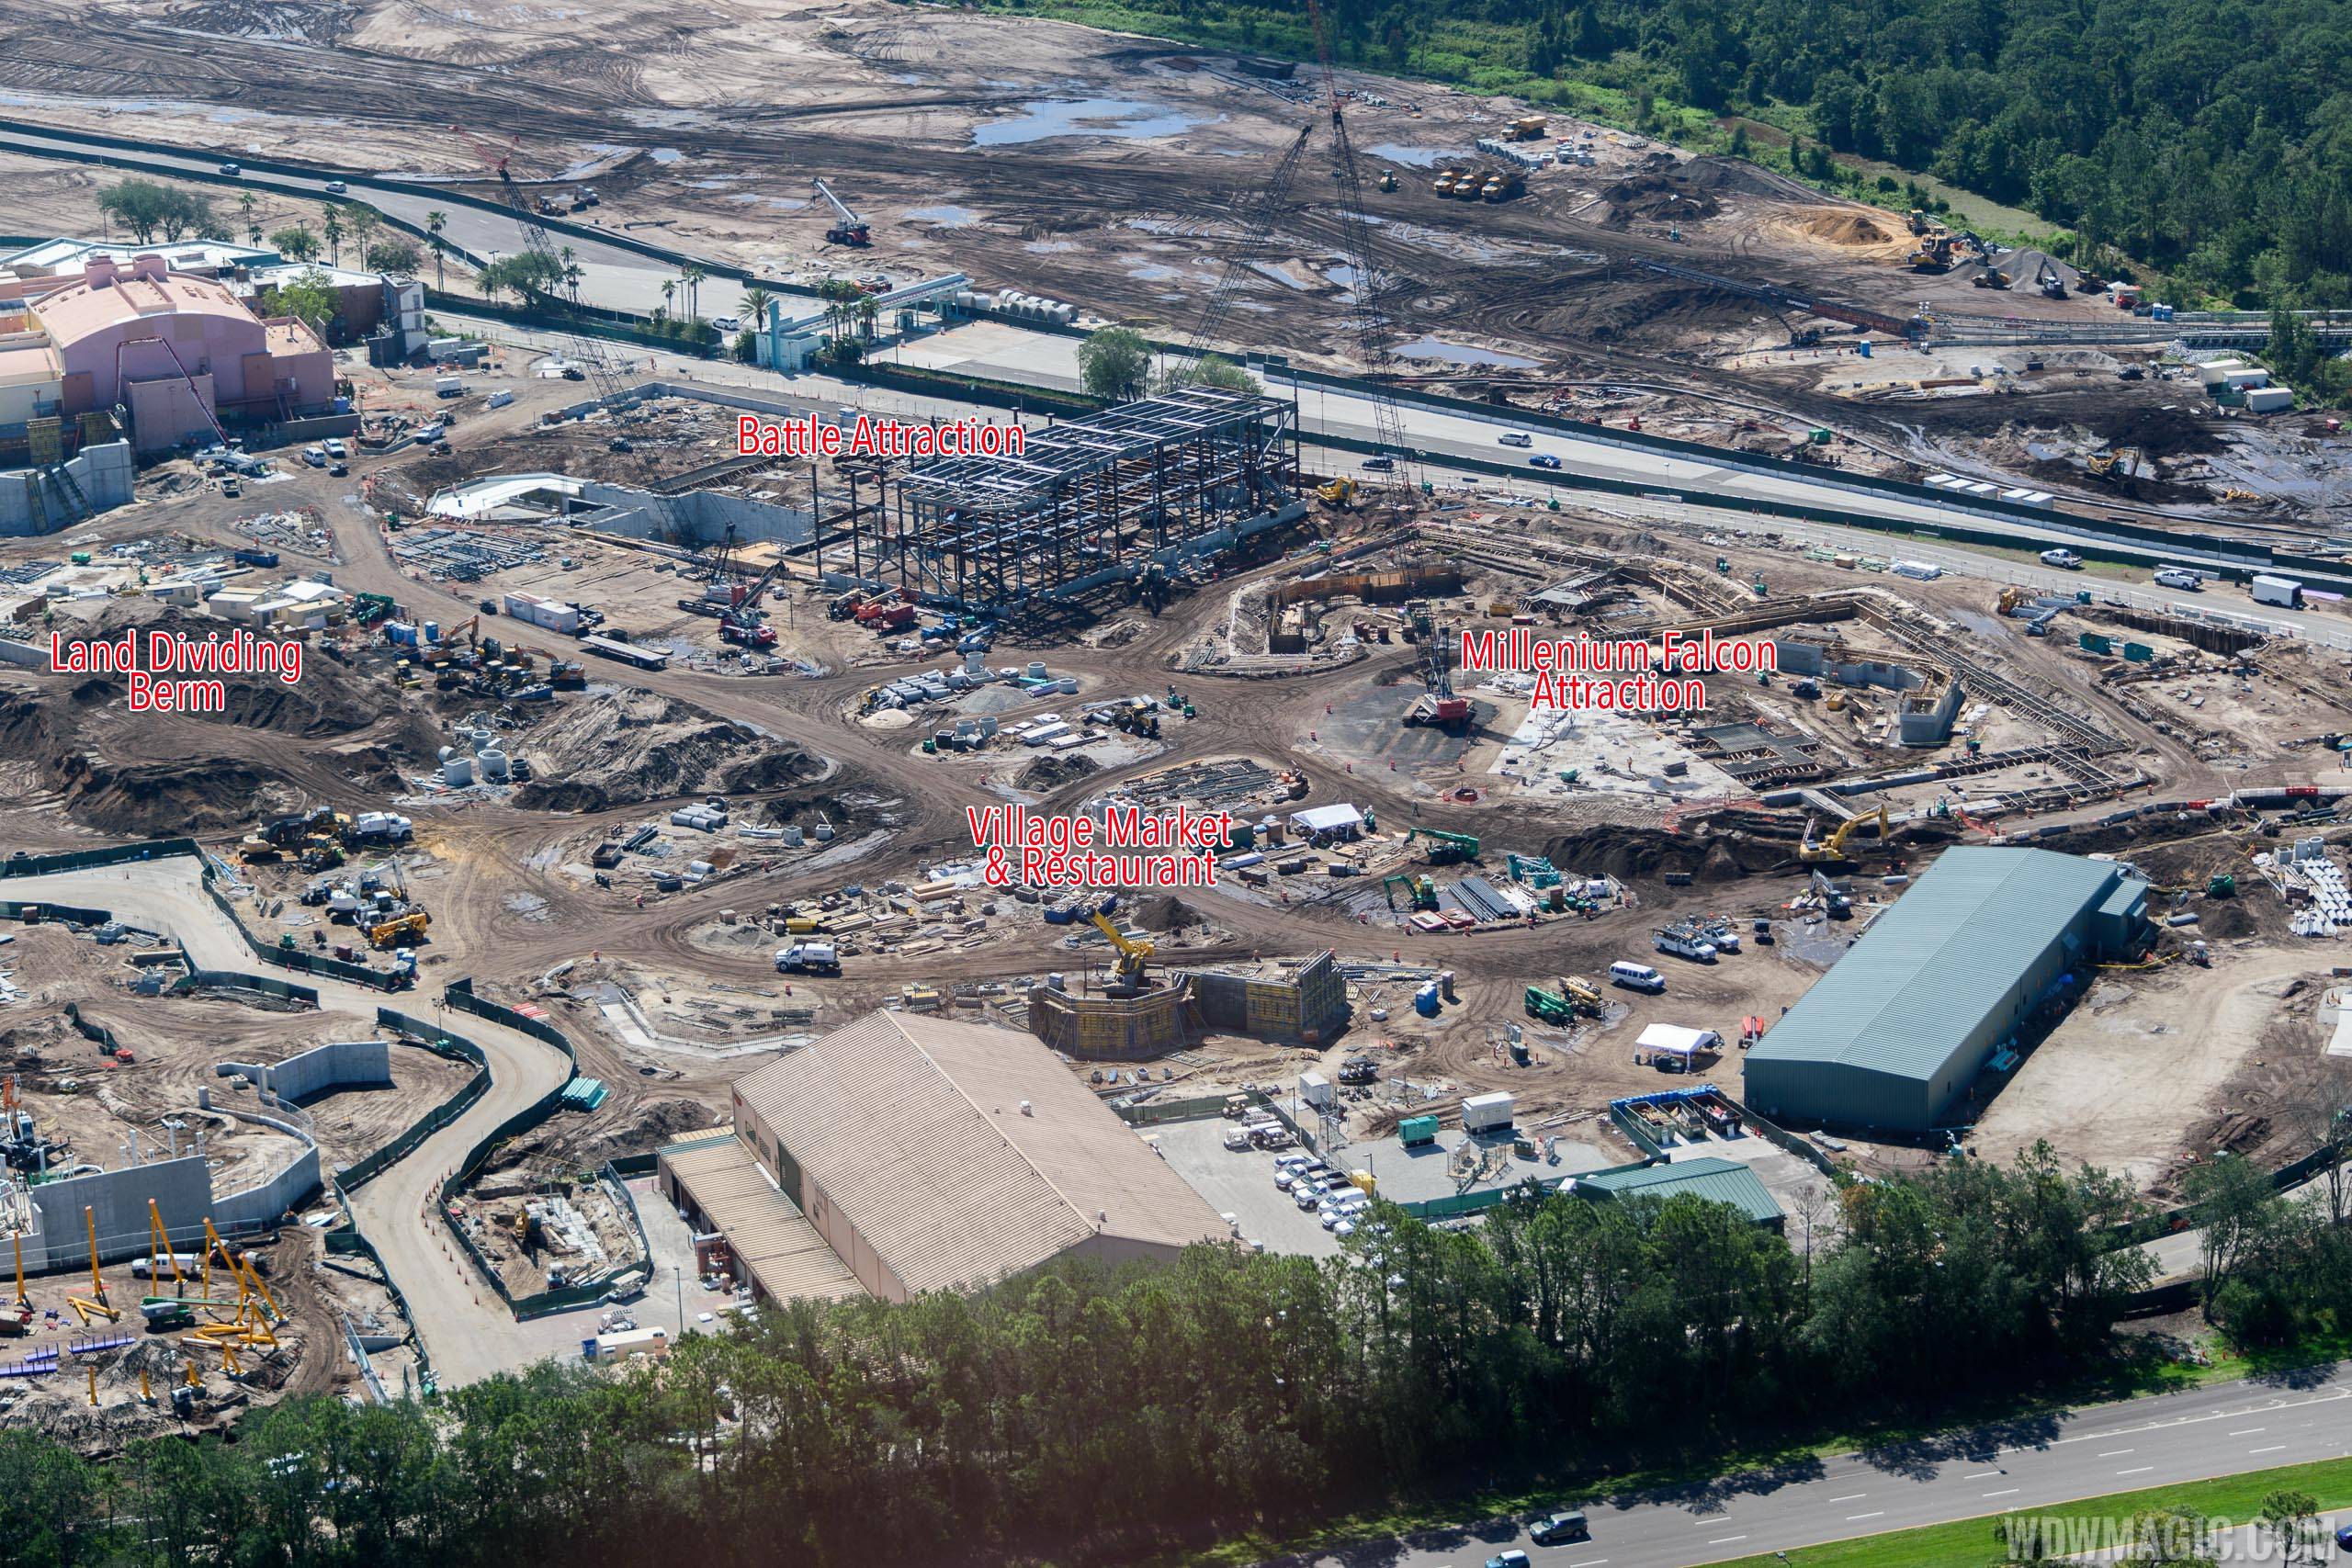 Annotated aerial view of Star Wars Land at Disney's Hollywood Studios